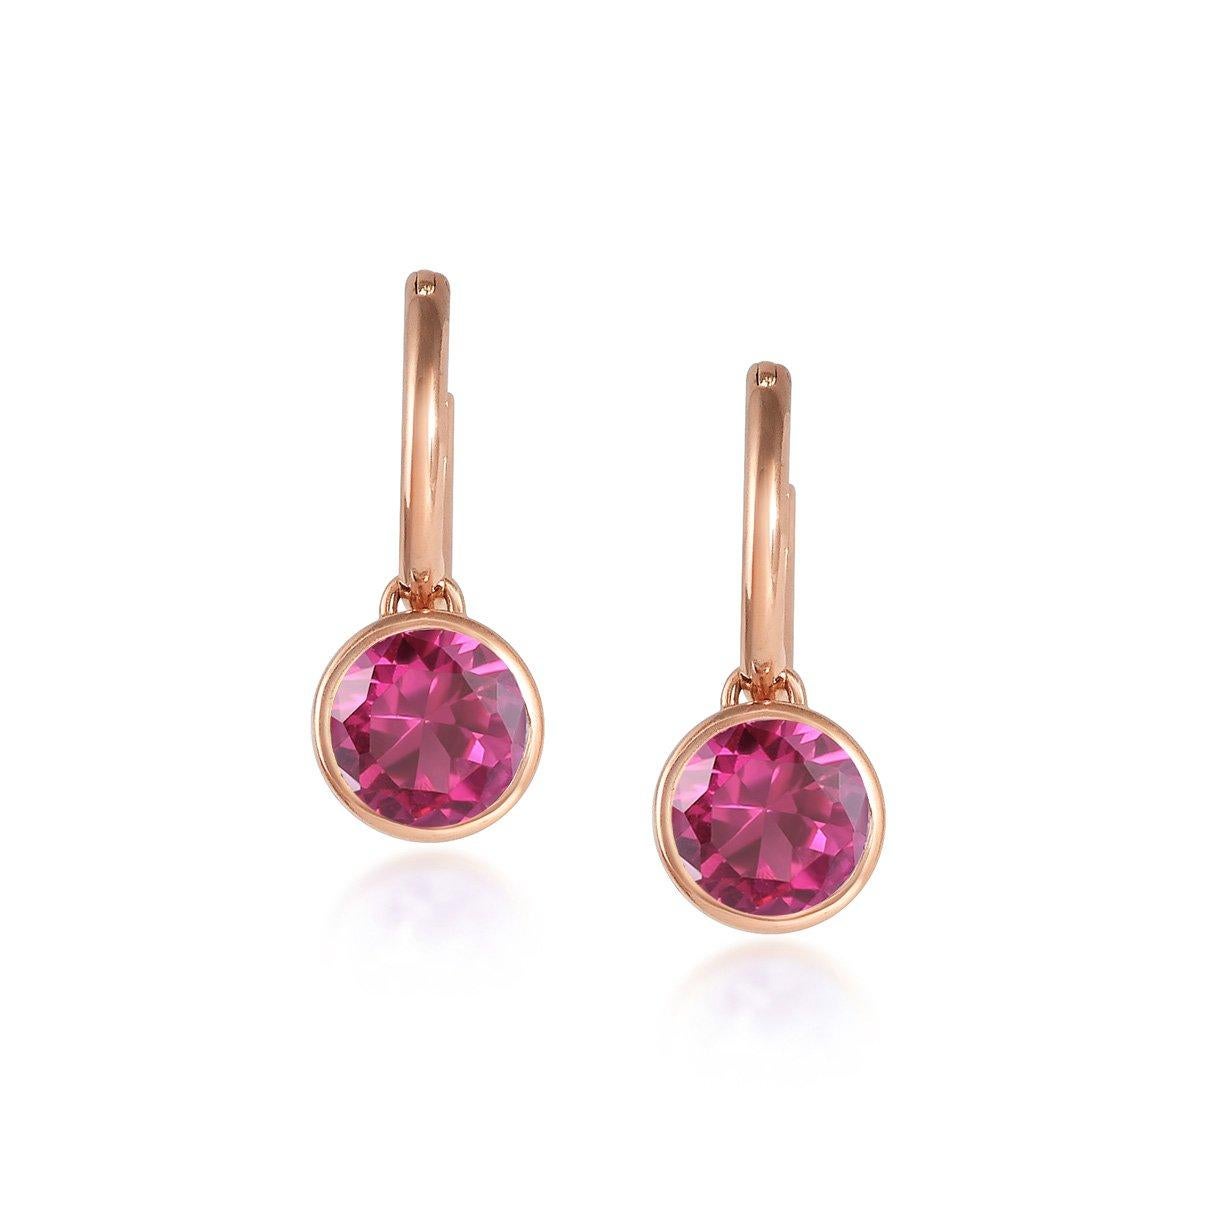 Round Cut Handcrafted 2.60 Carats Pink Tourmaline 18 Karat Rose Gold Drop Earrings For Sale